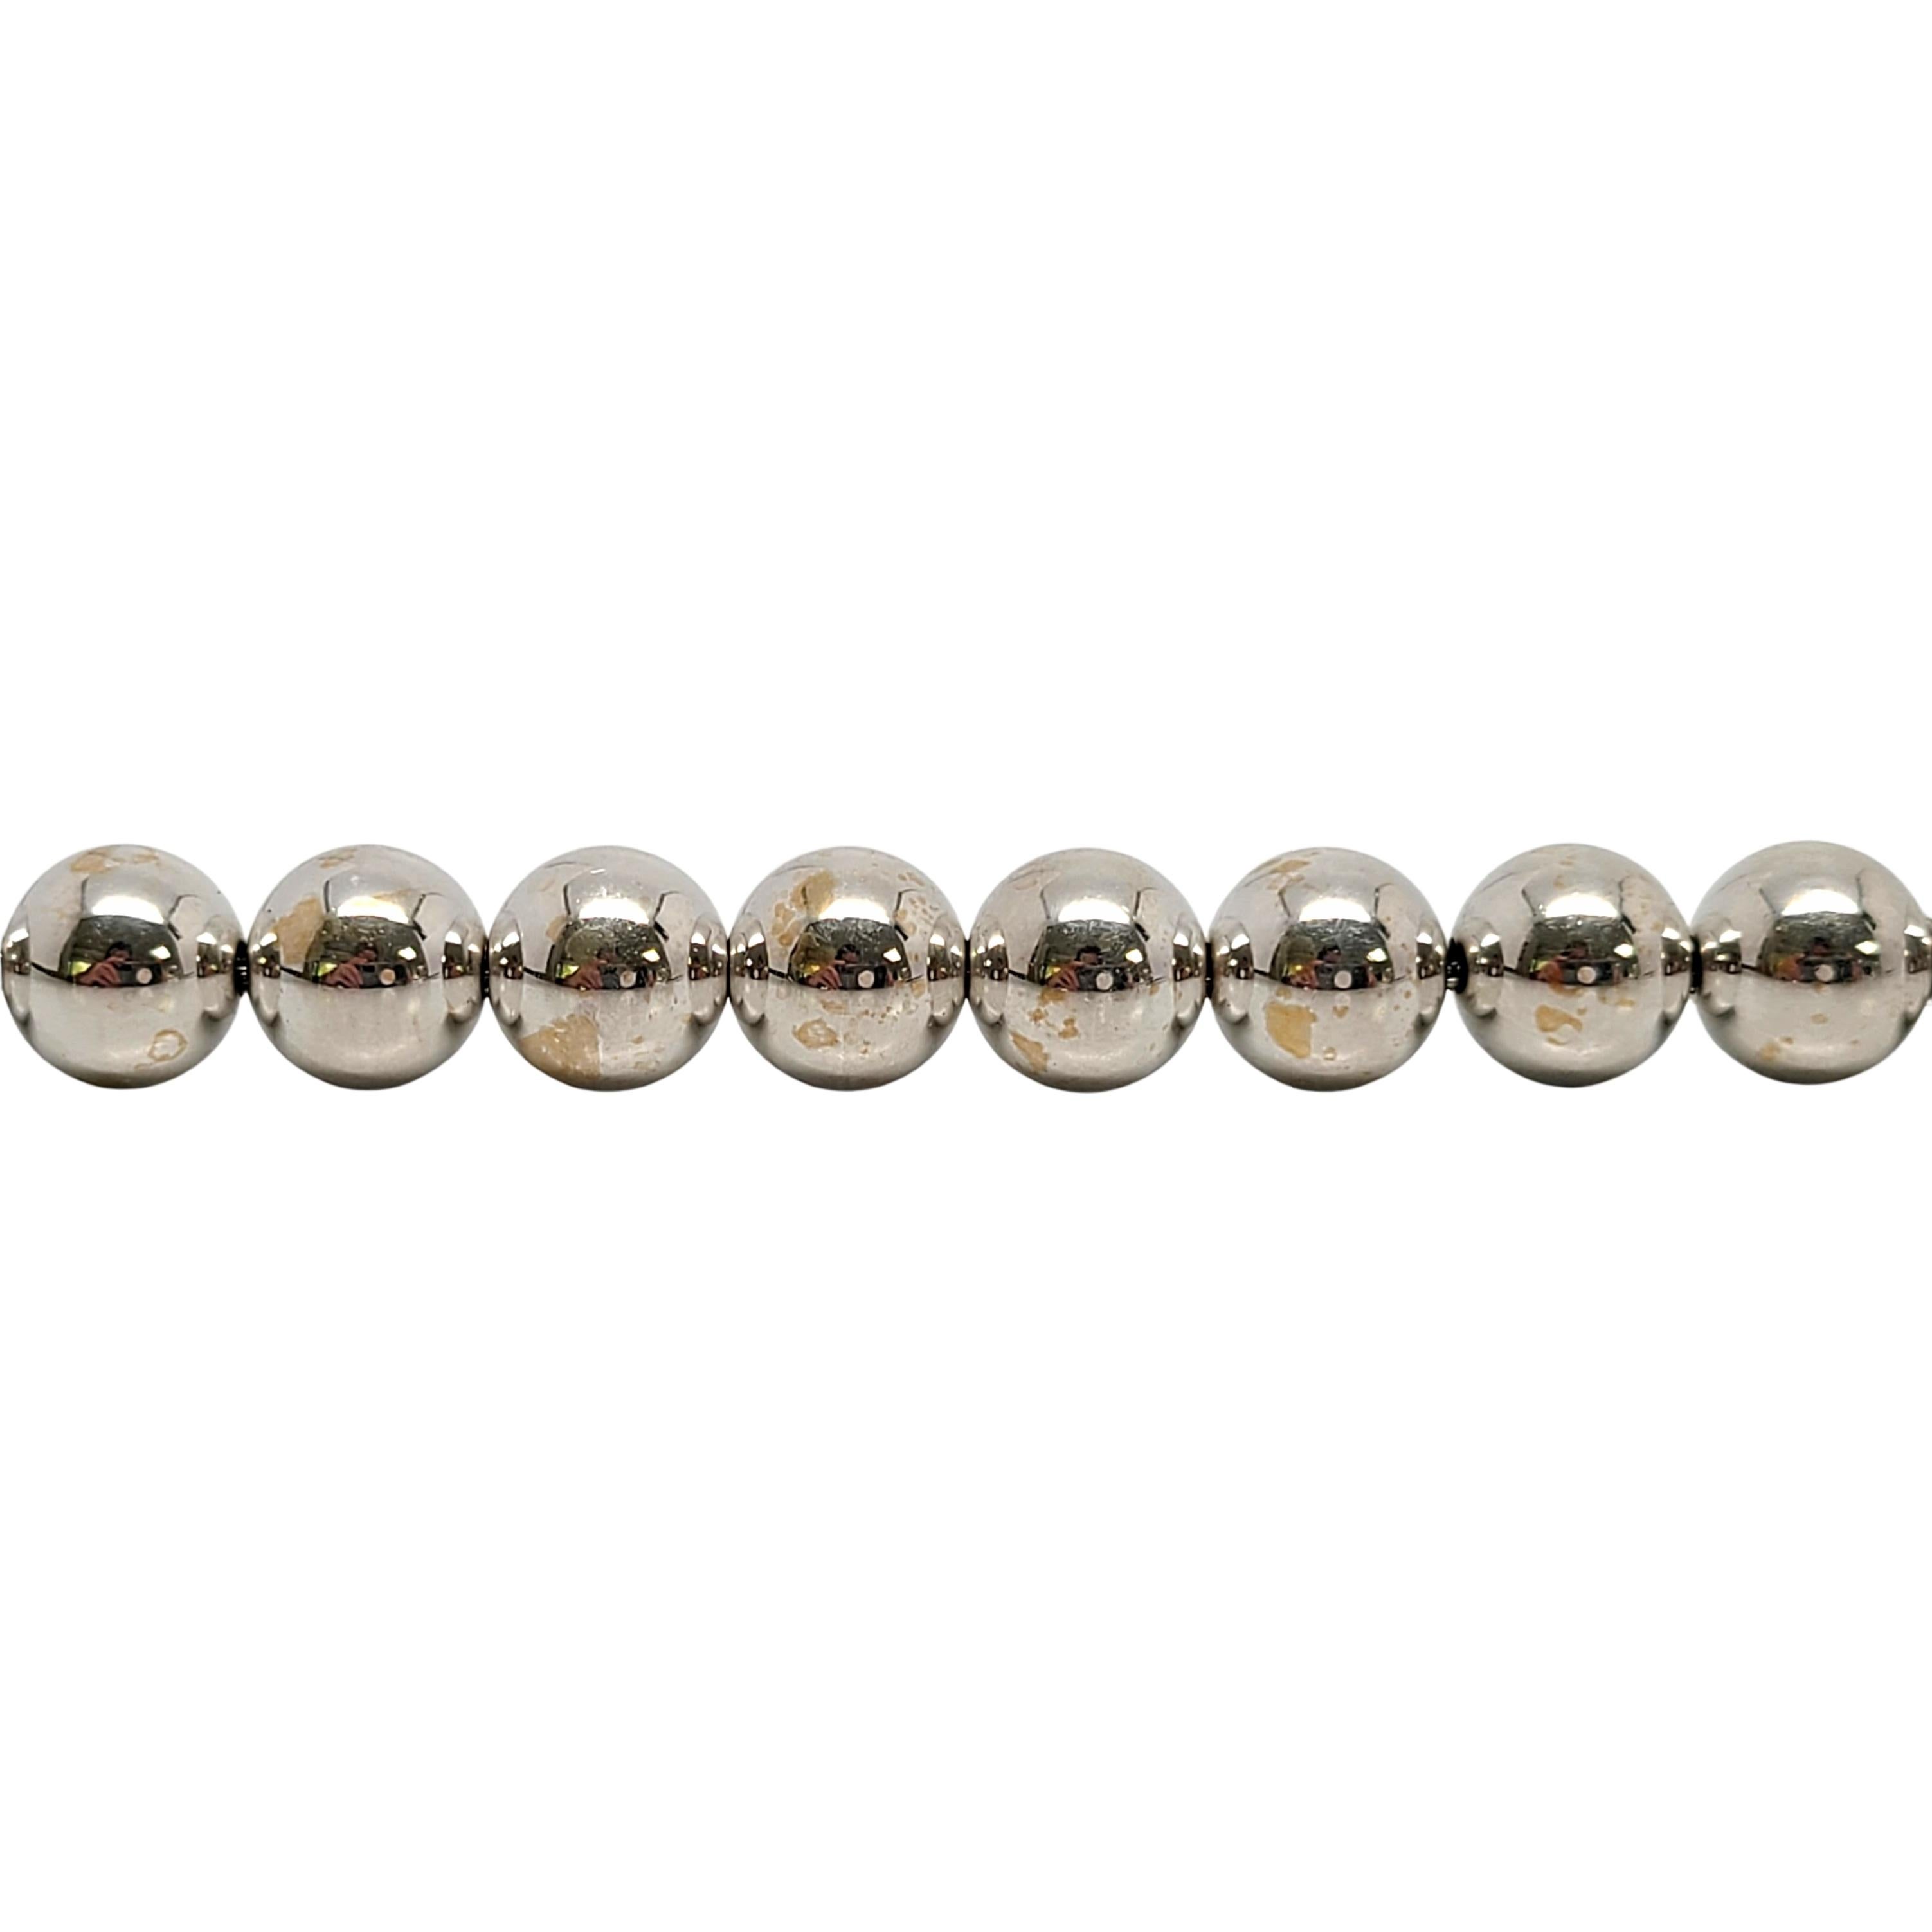 Sterling silver ball bracelet by Tiffany & Co.

Authentic Tiffany ball bracelet featuring 10mm balls and lobster claw closure. Tiffany box and pouch not included.

Measures 7 1/2